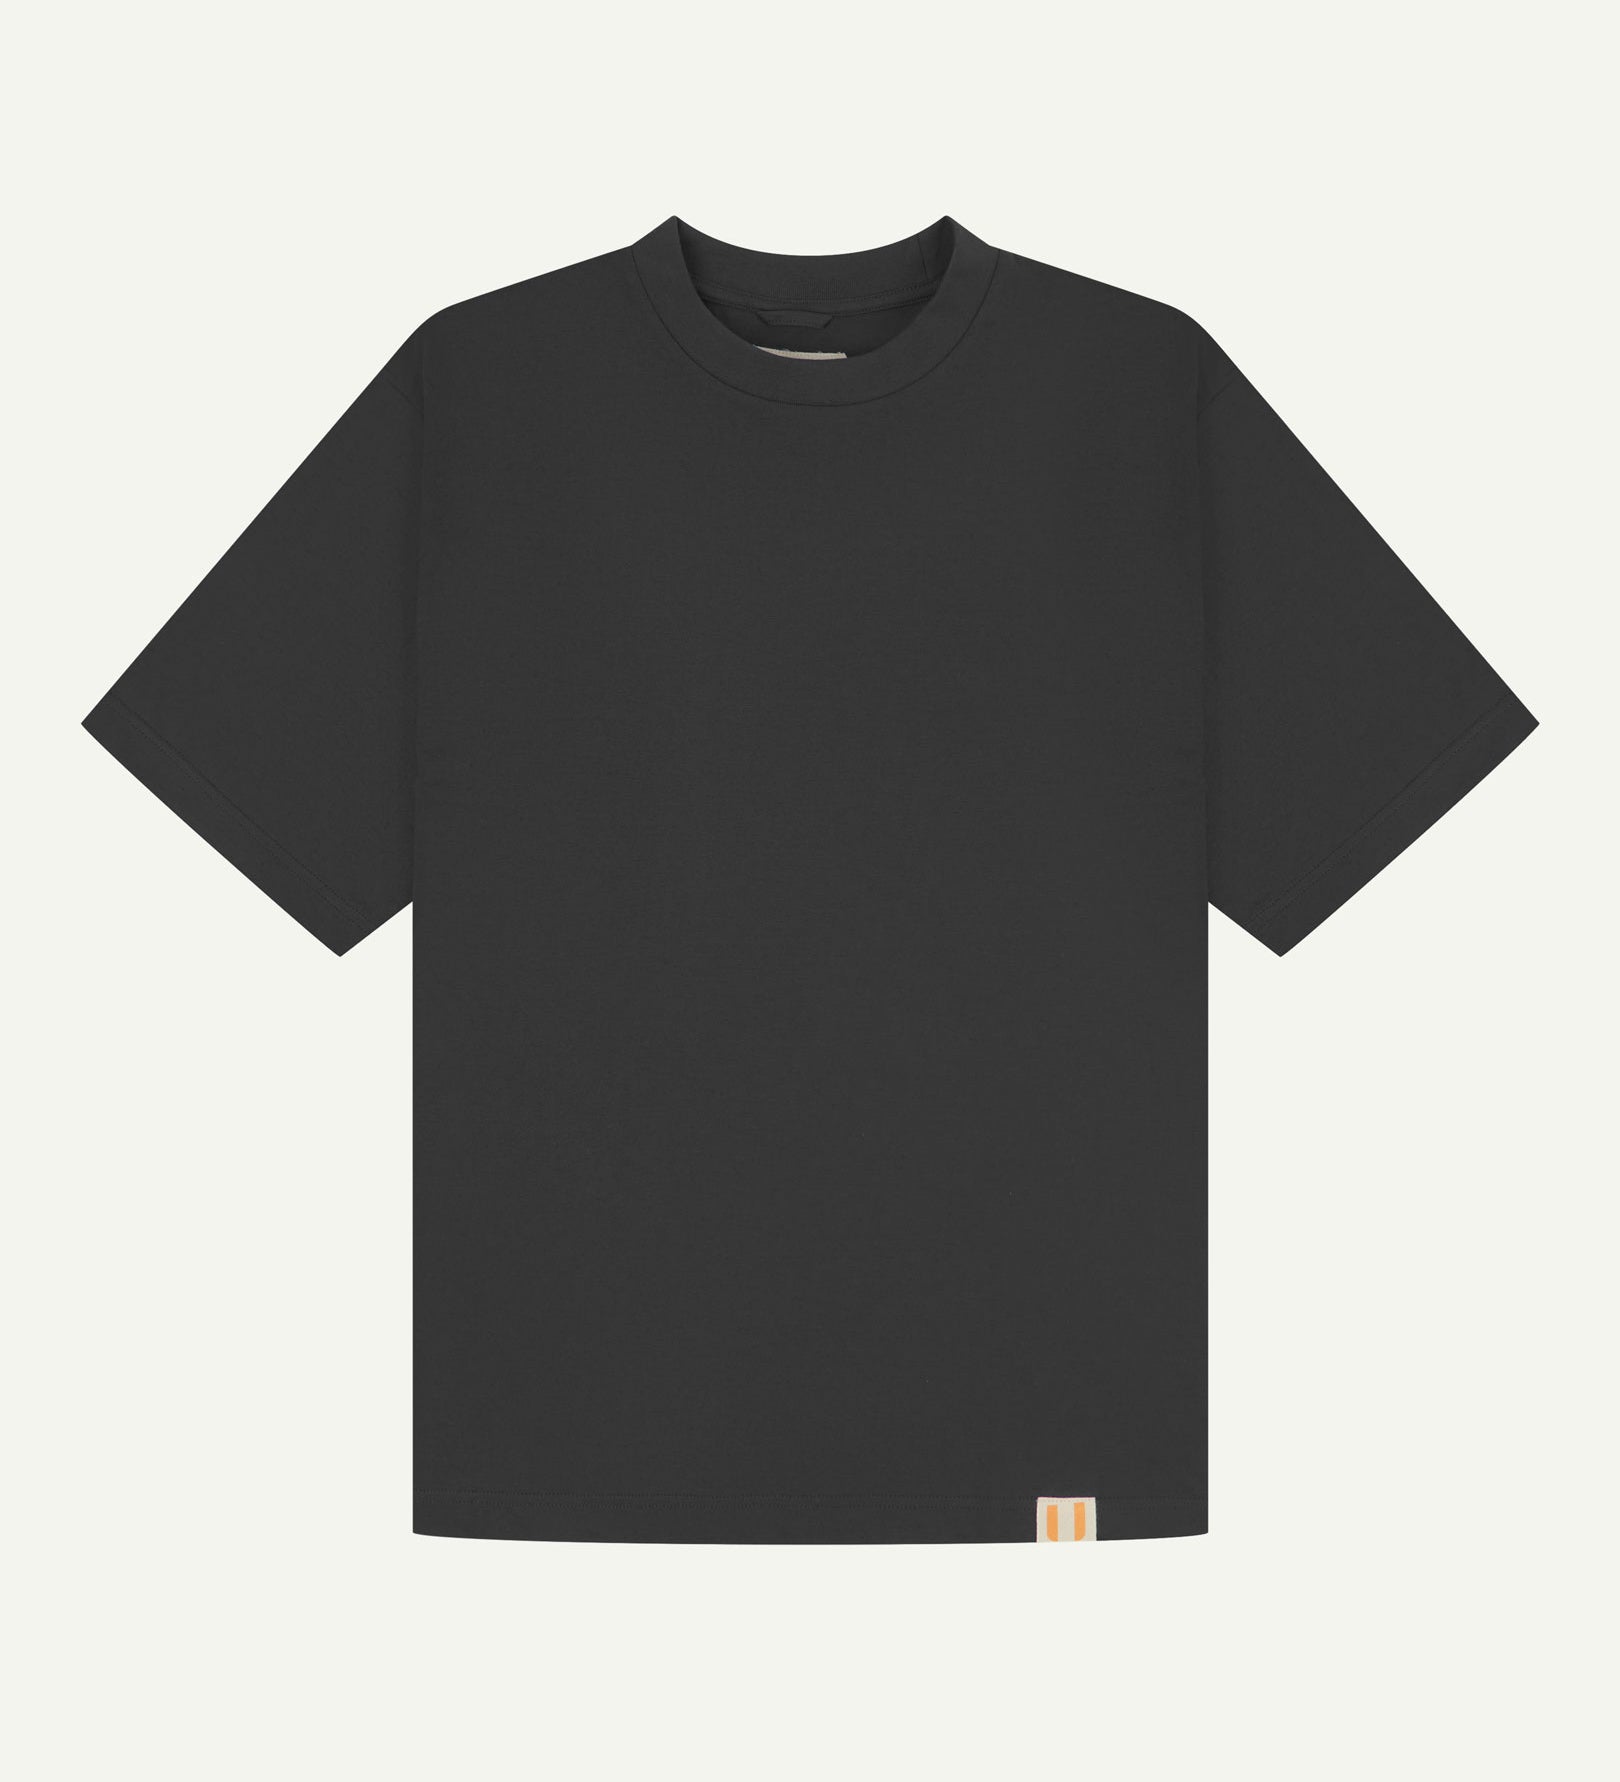 Full flat view of faded black, organic cotton, oversized T-shirt from Uskees.